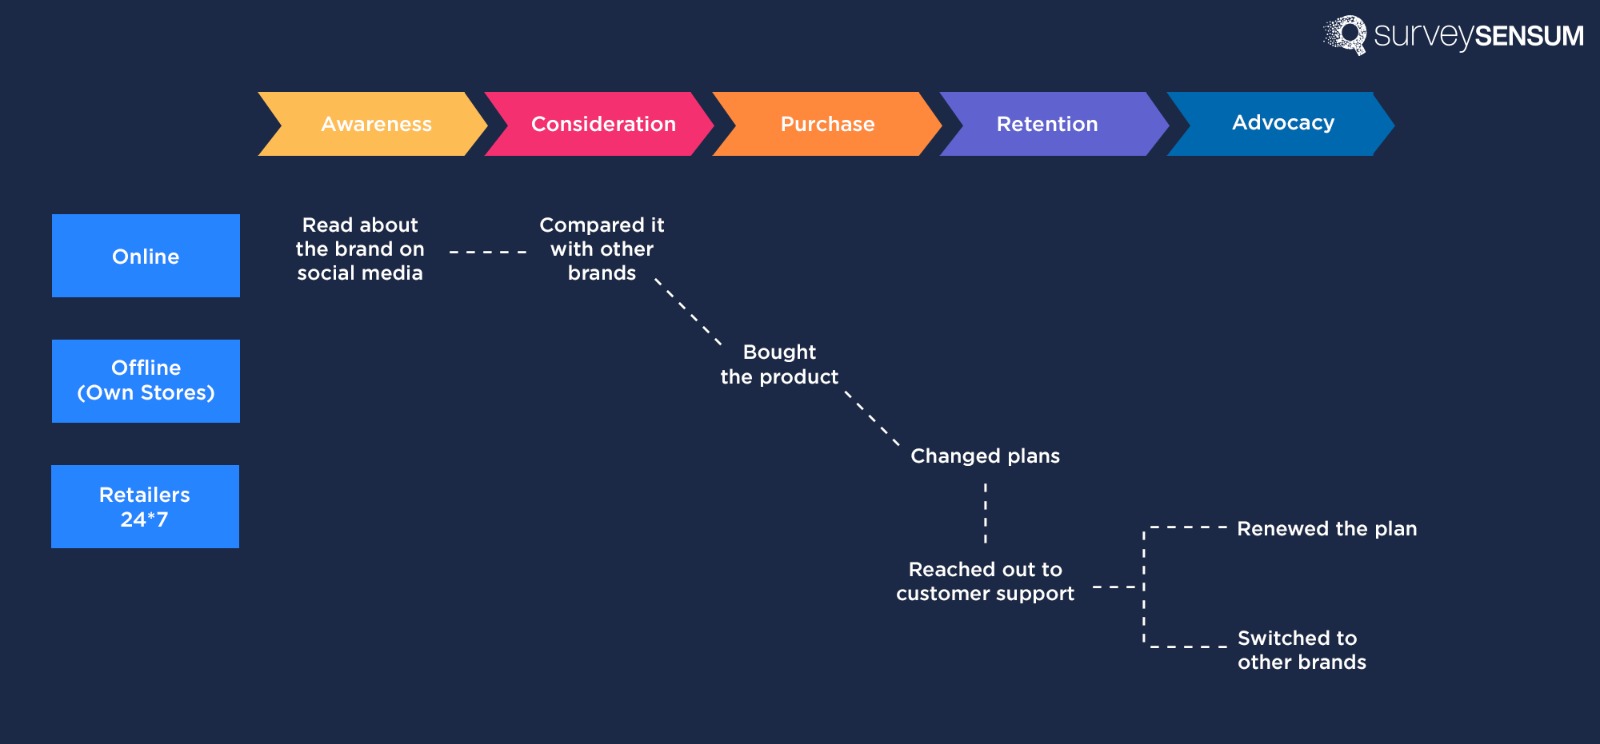 this is the image of customer journey mapping of telecom company where the journey of the customer begins by reading about the brand online, purchasing the product, changing plans, contacting the support team and finally either renewing the product or switching to other brands.